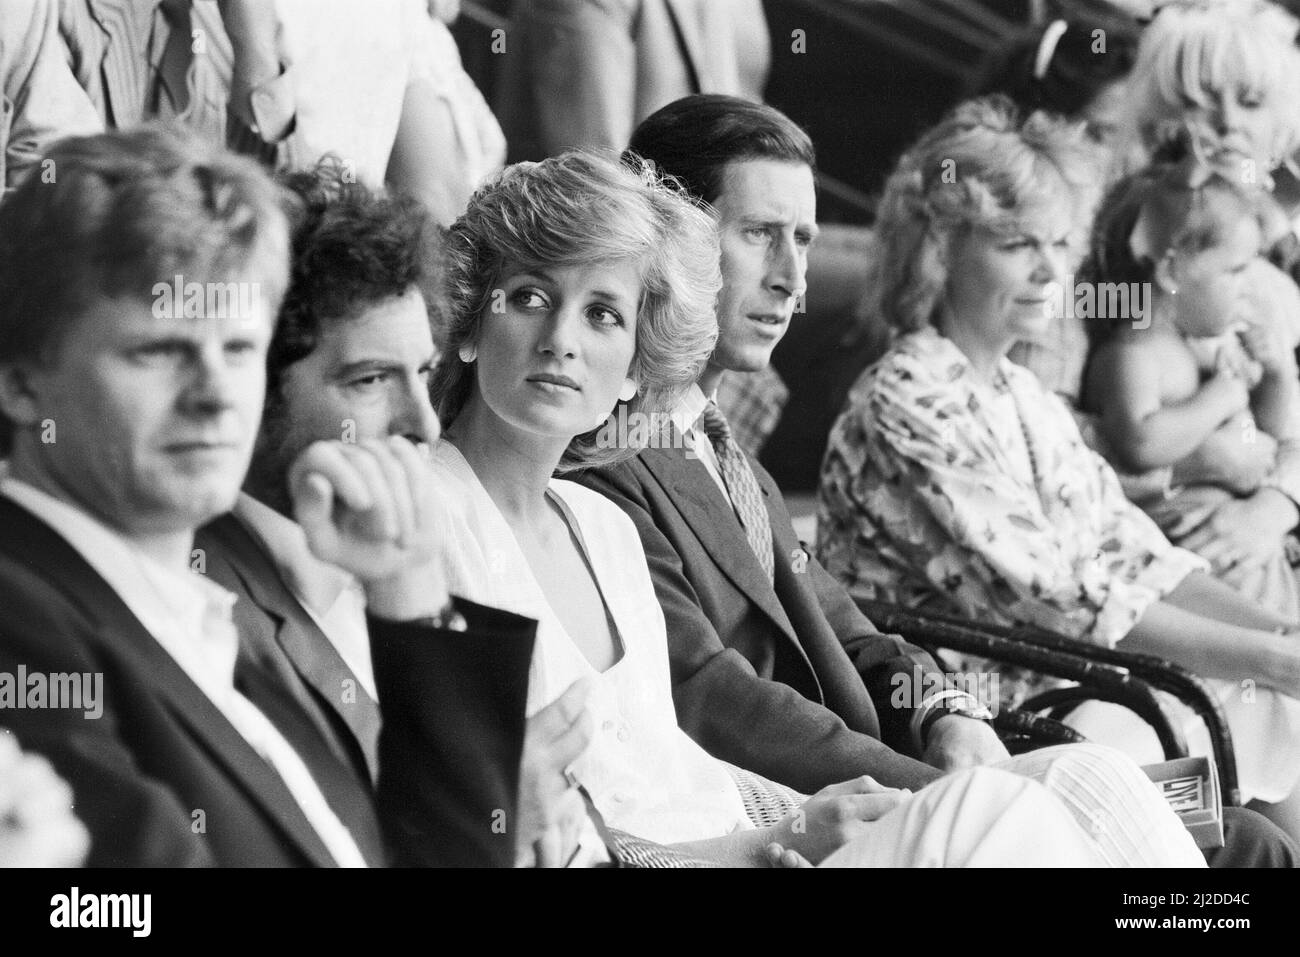 Live Aid dual venue benefit concert held on 13th July 1985 at Wembley Stadium in London, England, and the John F. Kennedy Stadium in Philadelphia, Pennsylvania, United States. The concerts were organised as a follow up to the Band Aid single 'Do They Know Its Christmas?'  to raise money for victims of the famine in Ethiopia. Picture shows  princess Diana and Prince Charles, the Prince and Princess of Wales, watching  the concert at Wembley. Stock Photo